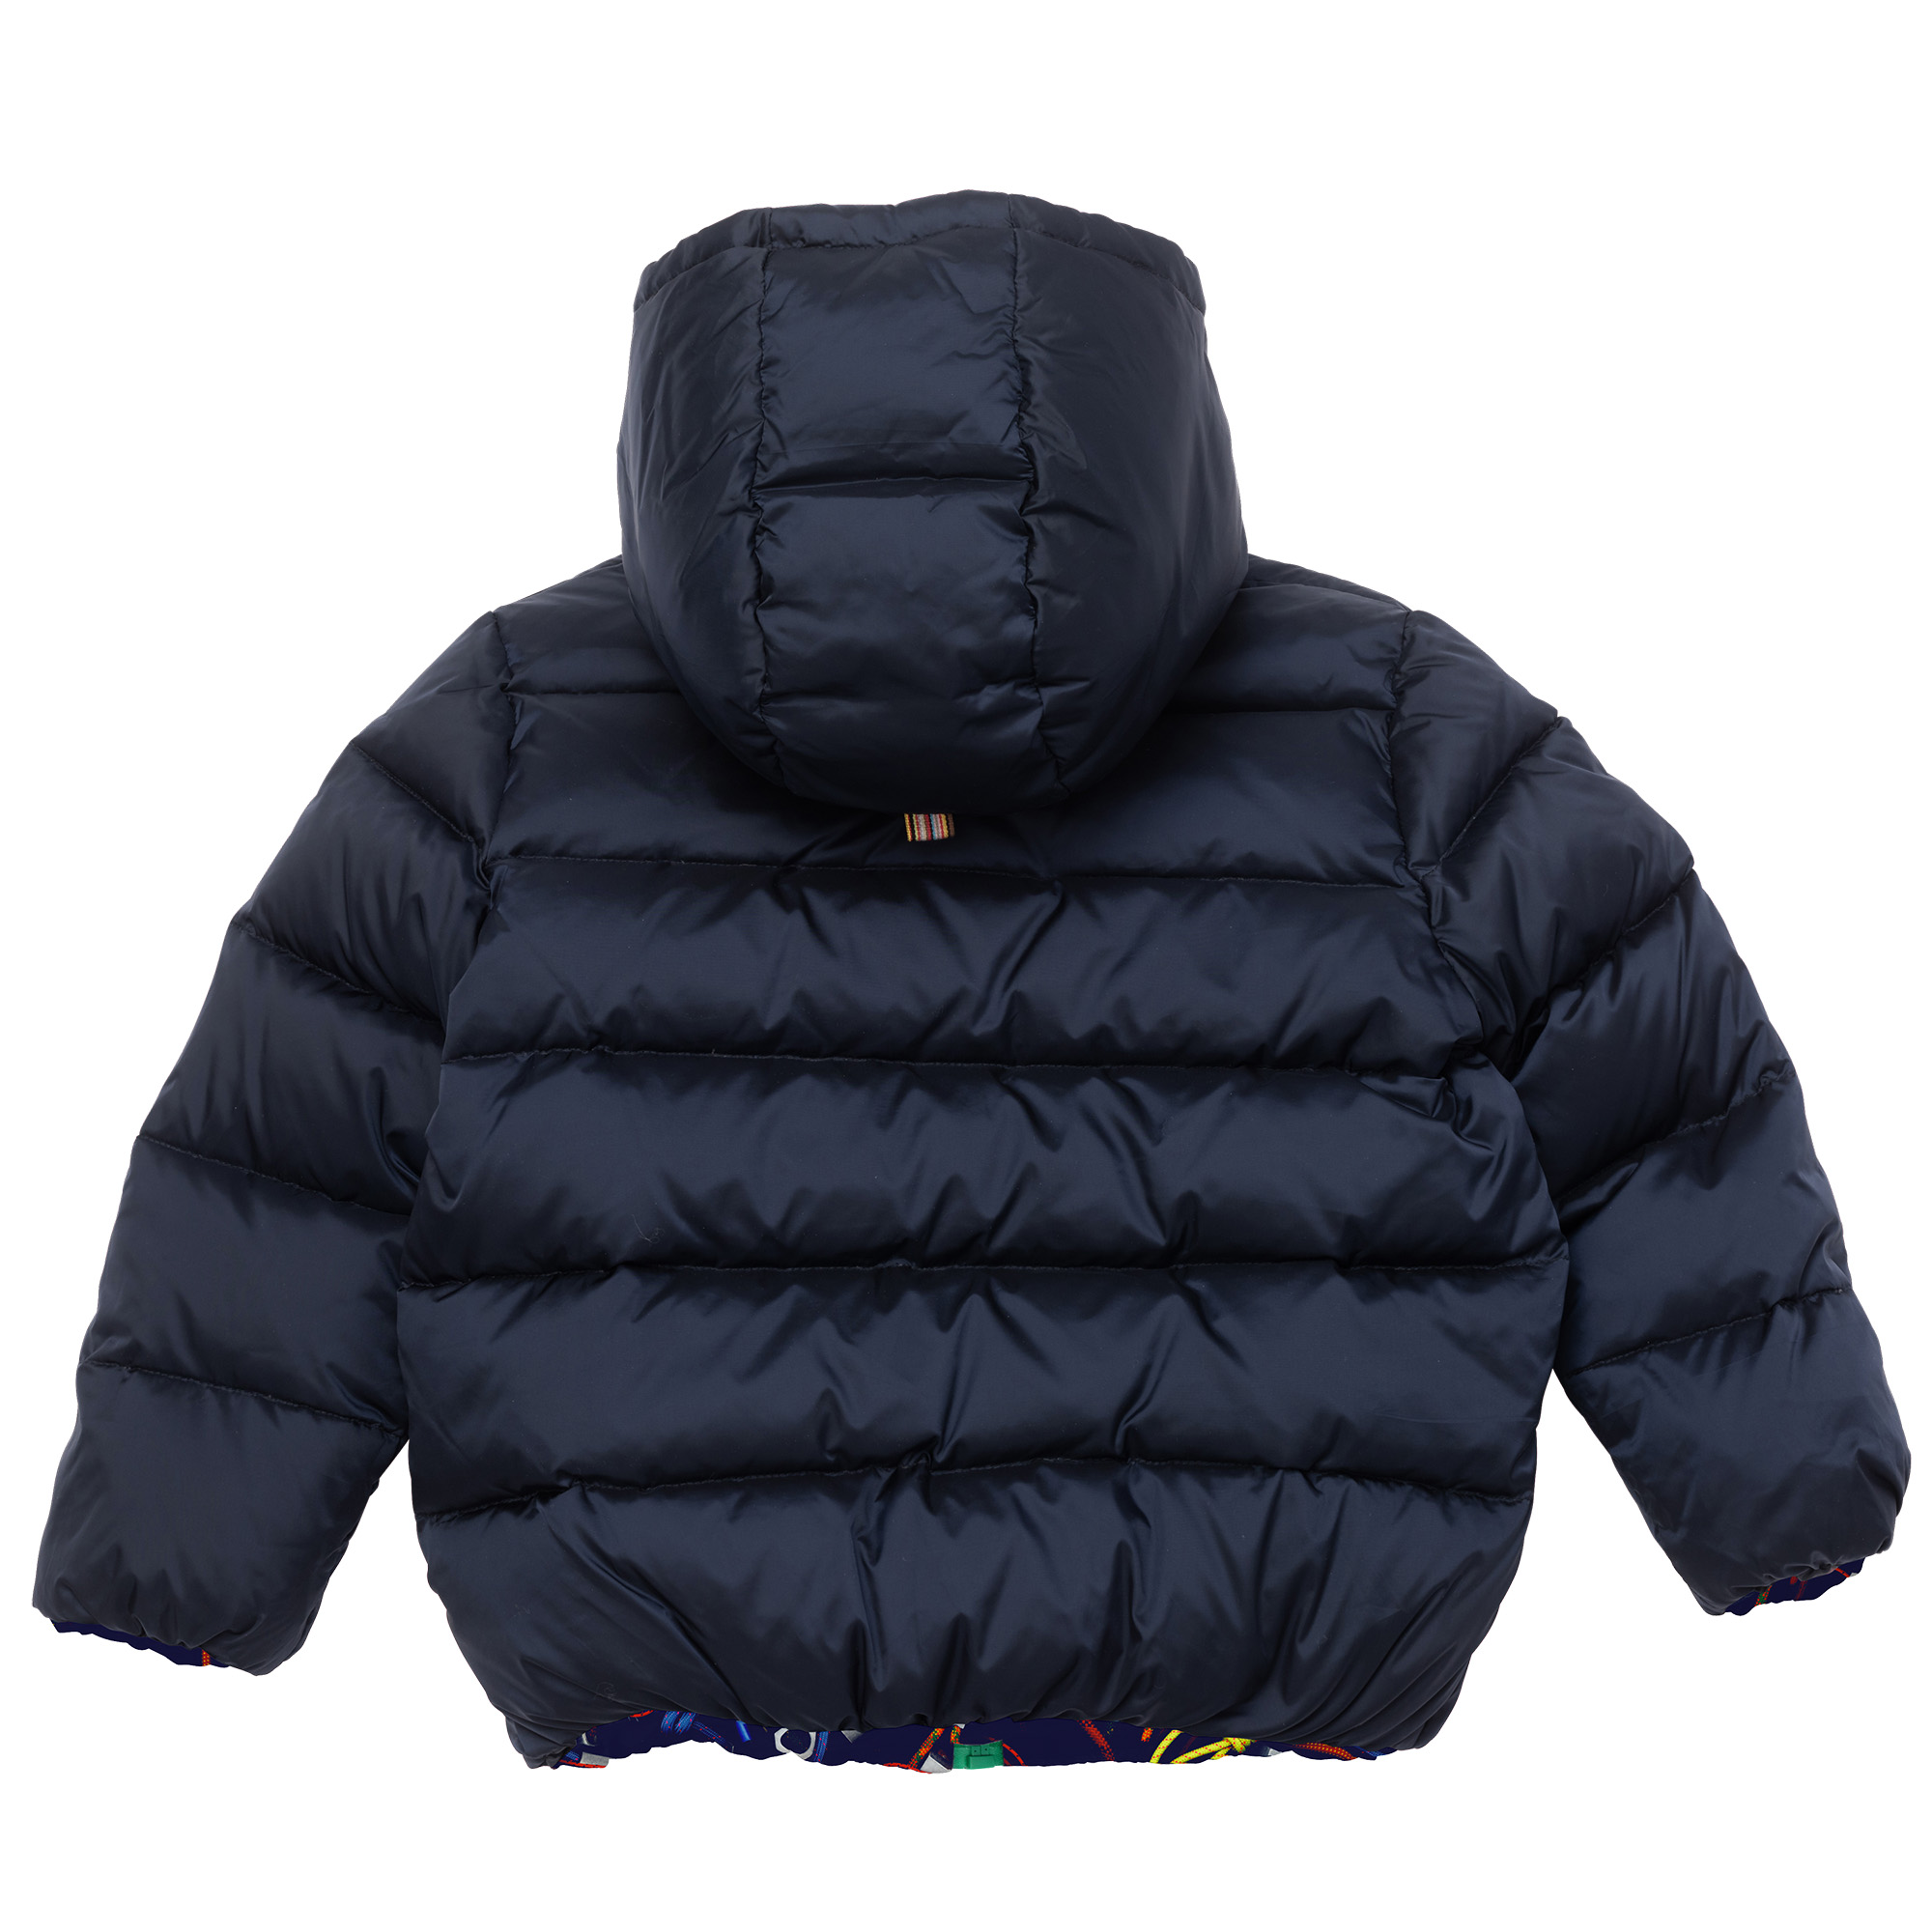 Reversible hooded down jacket PAUL SMITH JUNIOR for BOY